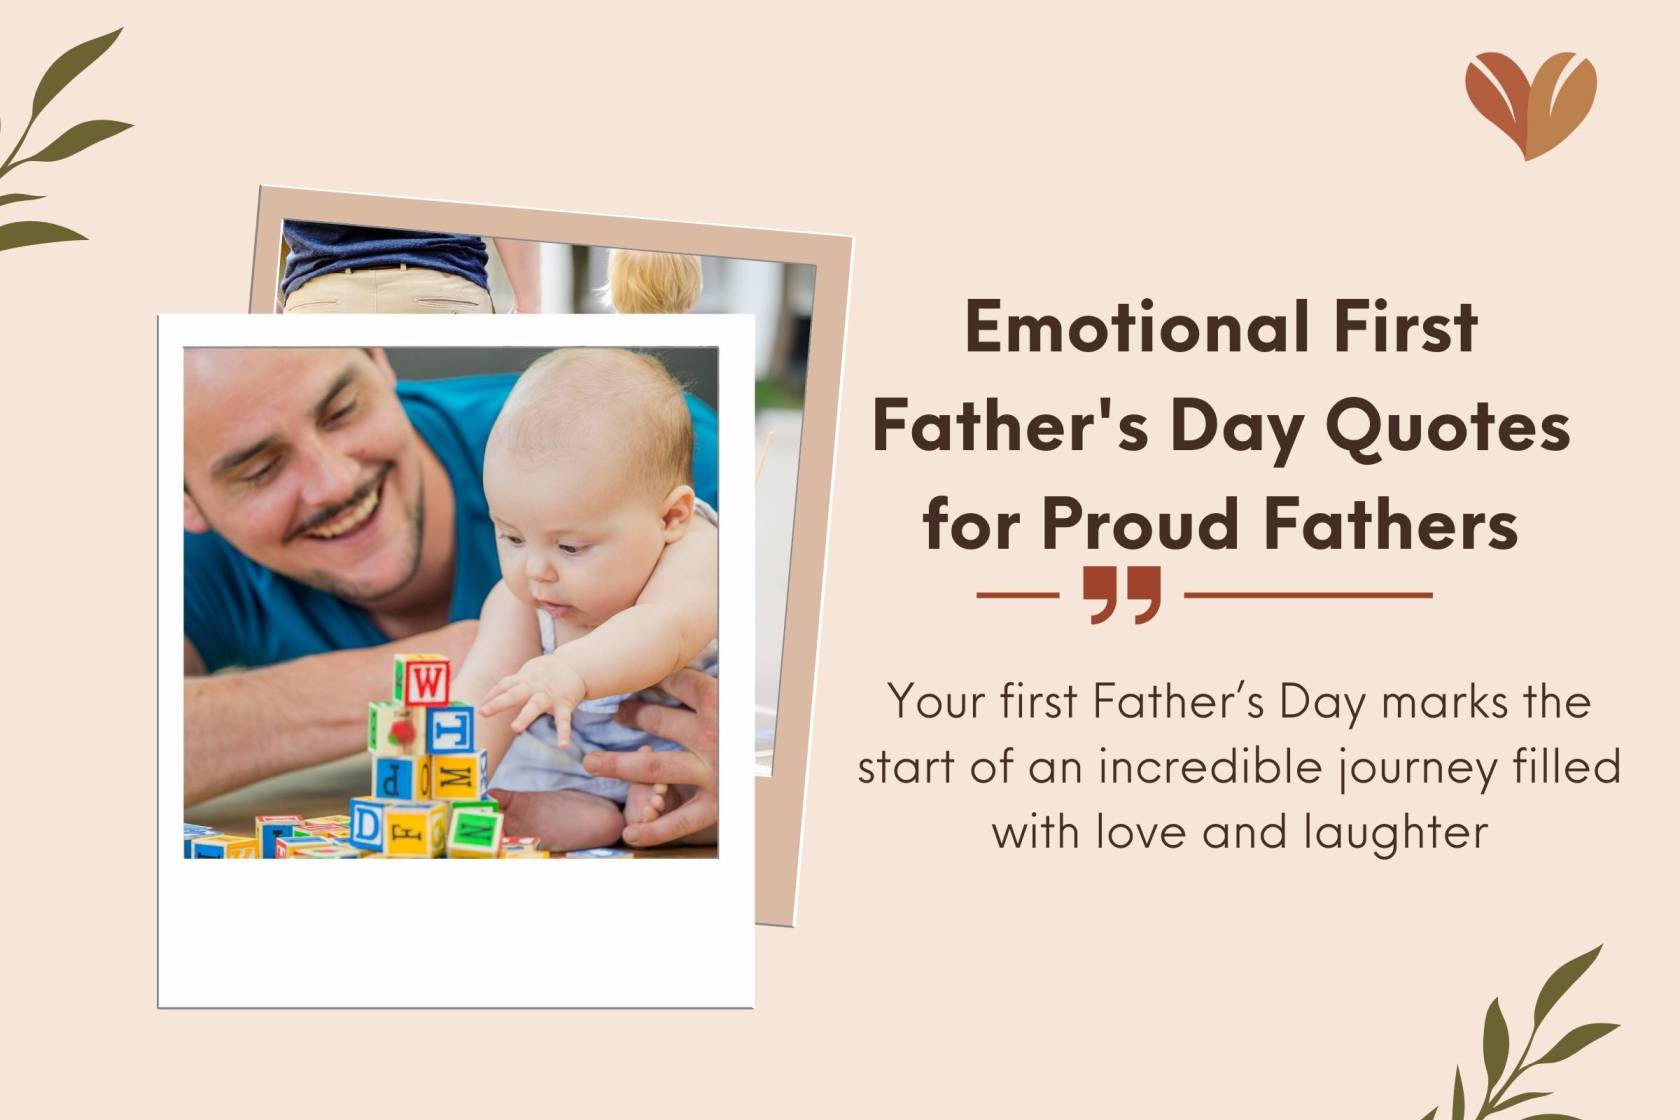 Emotional First Father's Day Quotes for Proud Fathers